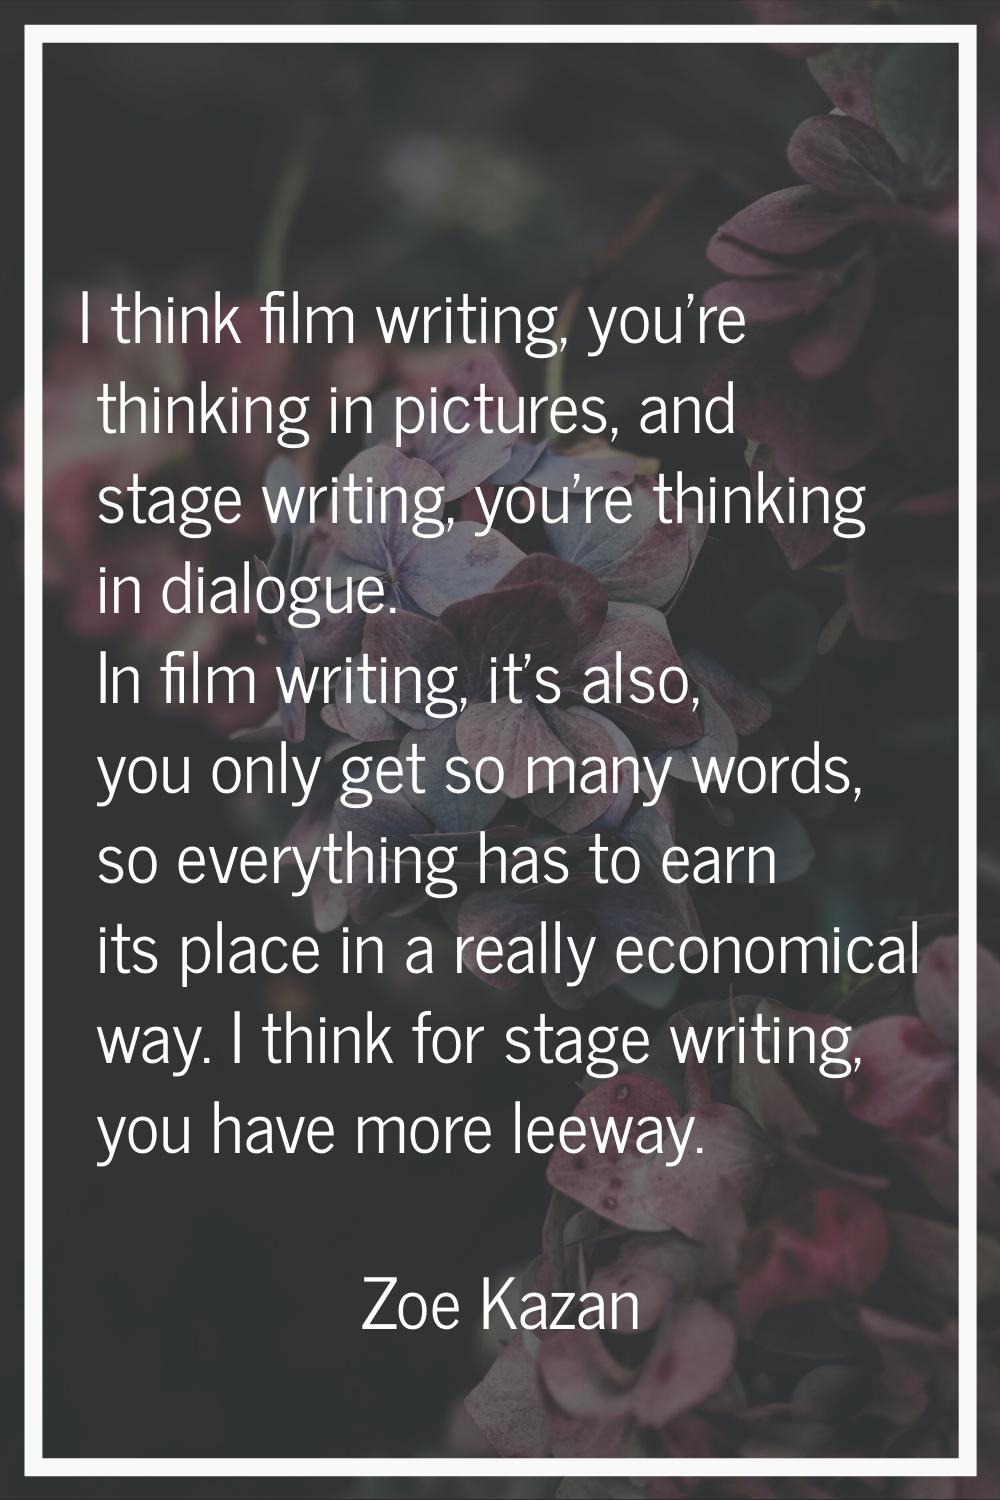 I think film writing, you're thinking in pictures, and stage writing, you're thinking in dialogue. 